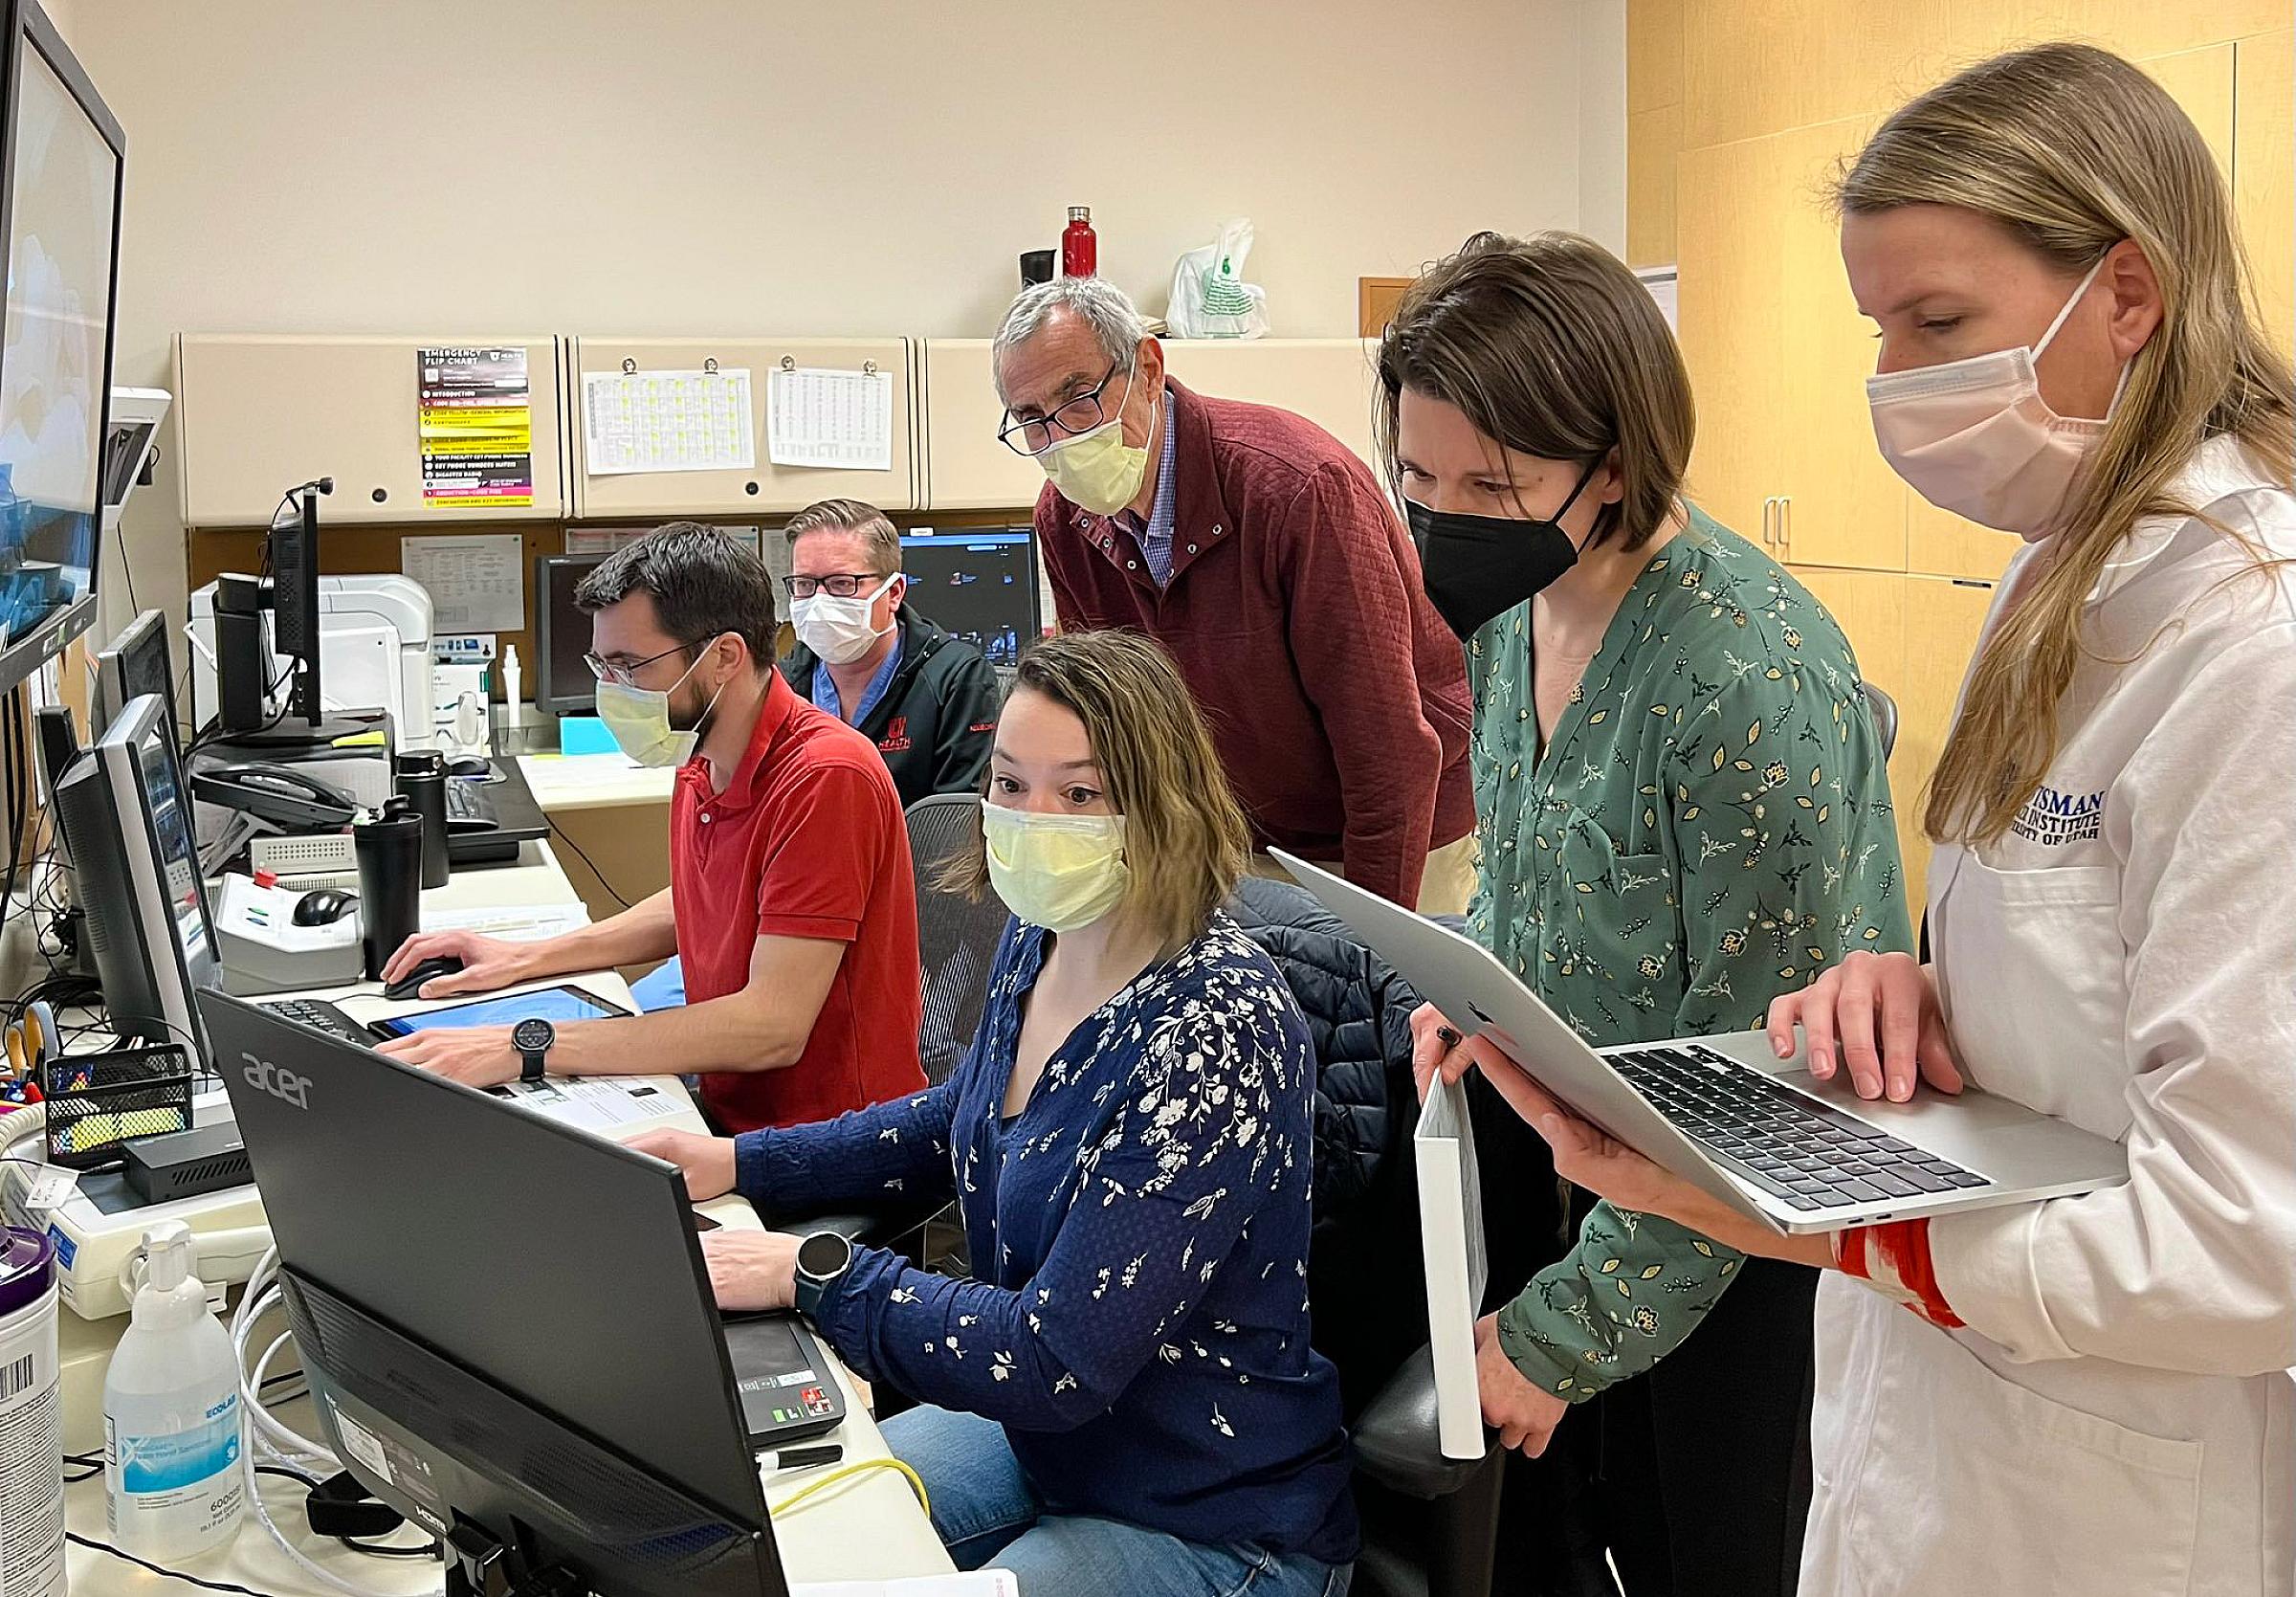 The team in the MRI control suite: (seated, left-to-right) Henrik Odéen, PhD, Derek Maxfield, Sara Johnson, PhD, (standing, left-to-right) Dennis Parker, PhD, Allison Payne, PhD, and Nicole Winkler, MD.